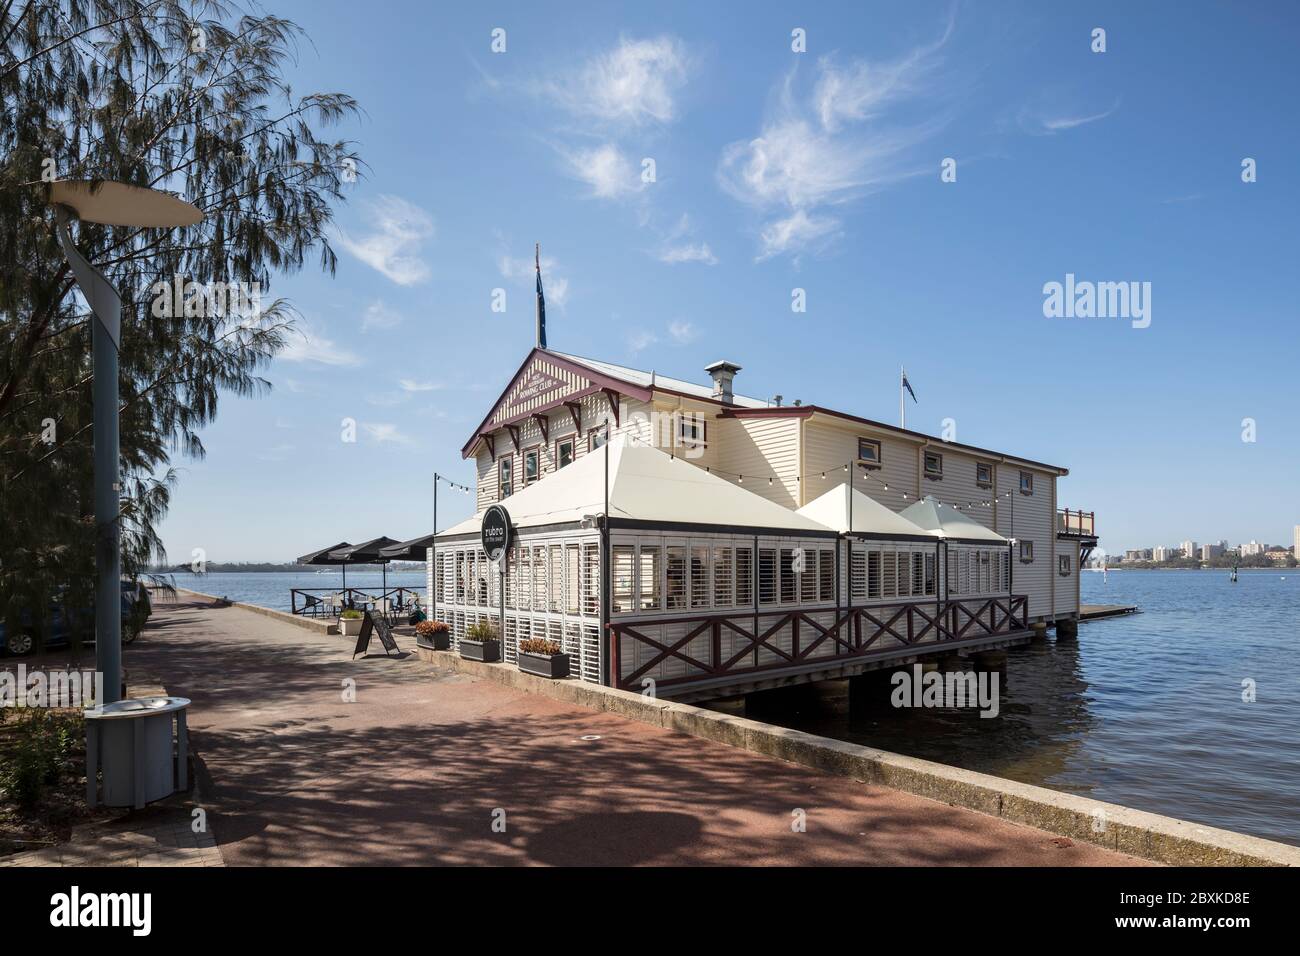 Perth Australia November 5th 2019: A lovely cafe located on the Swan River in Perth, housed inside a rowing club building Stock Photo